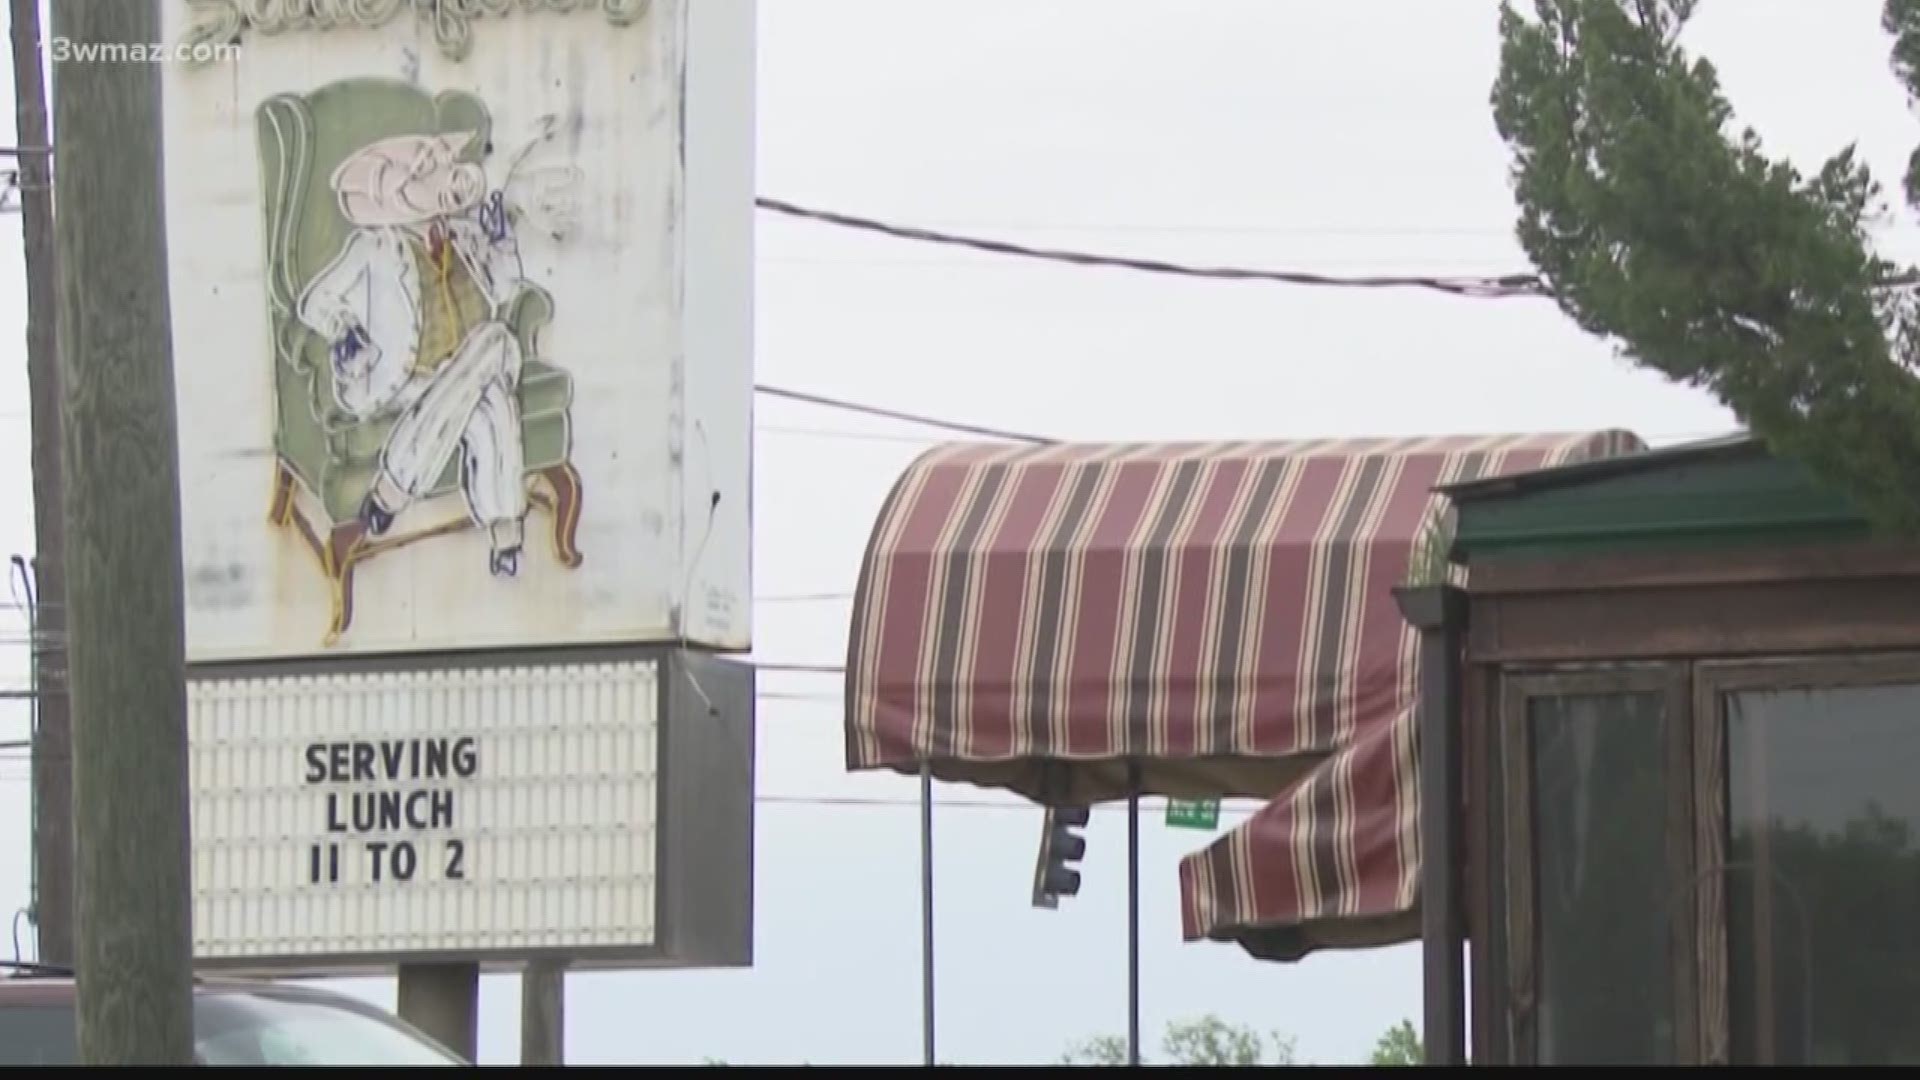 School and restaurant closings from the COVID-19 outbreak are leaving hundreds of people in Central Georgia food insecure and leaving businesses without money.